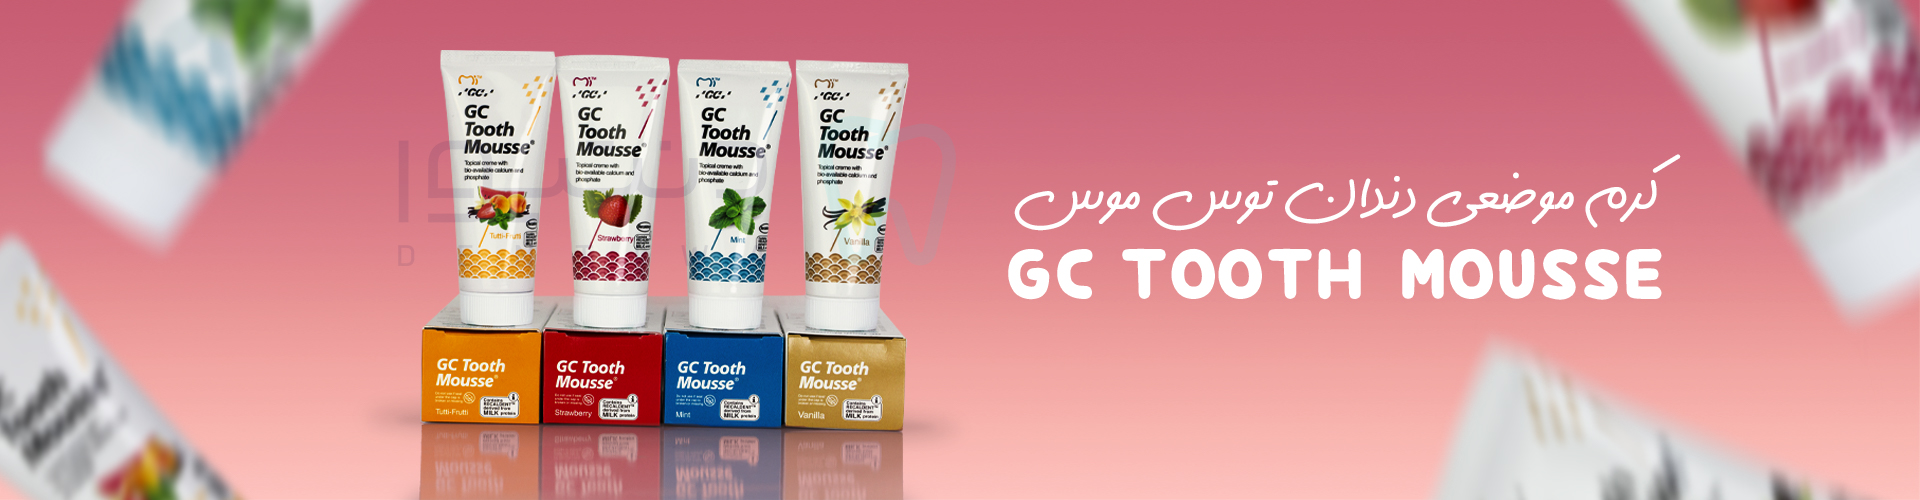 tooth mousse banner_